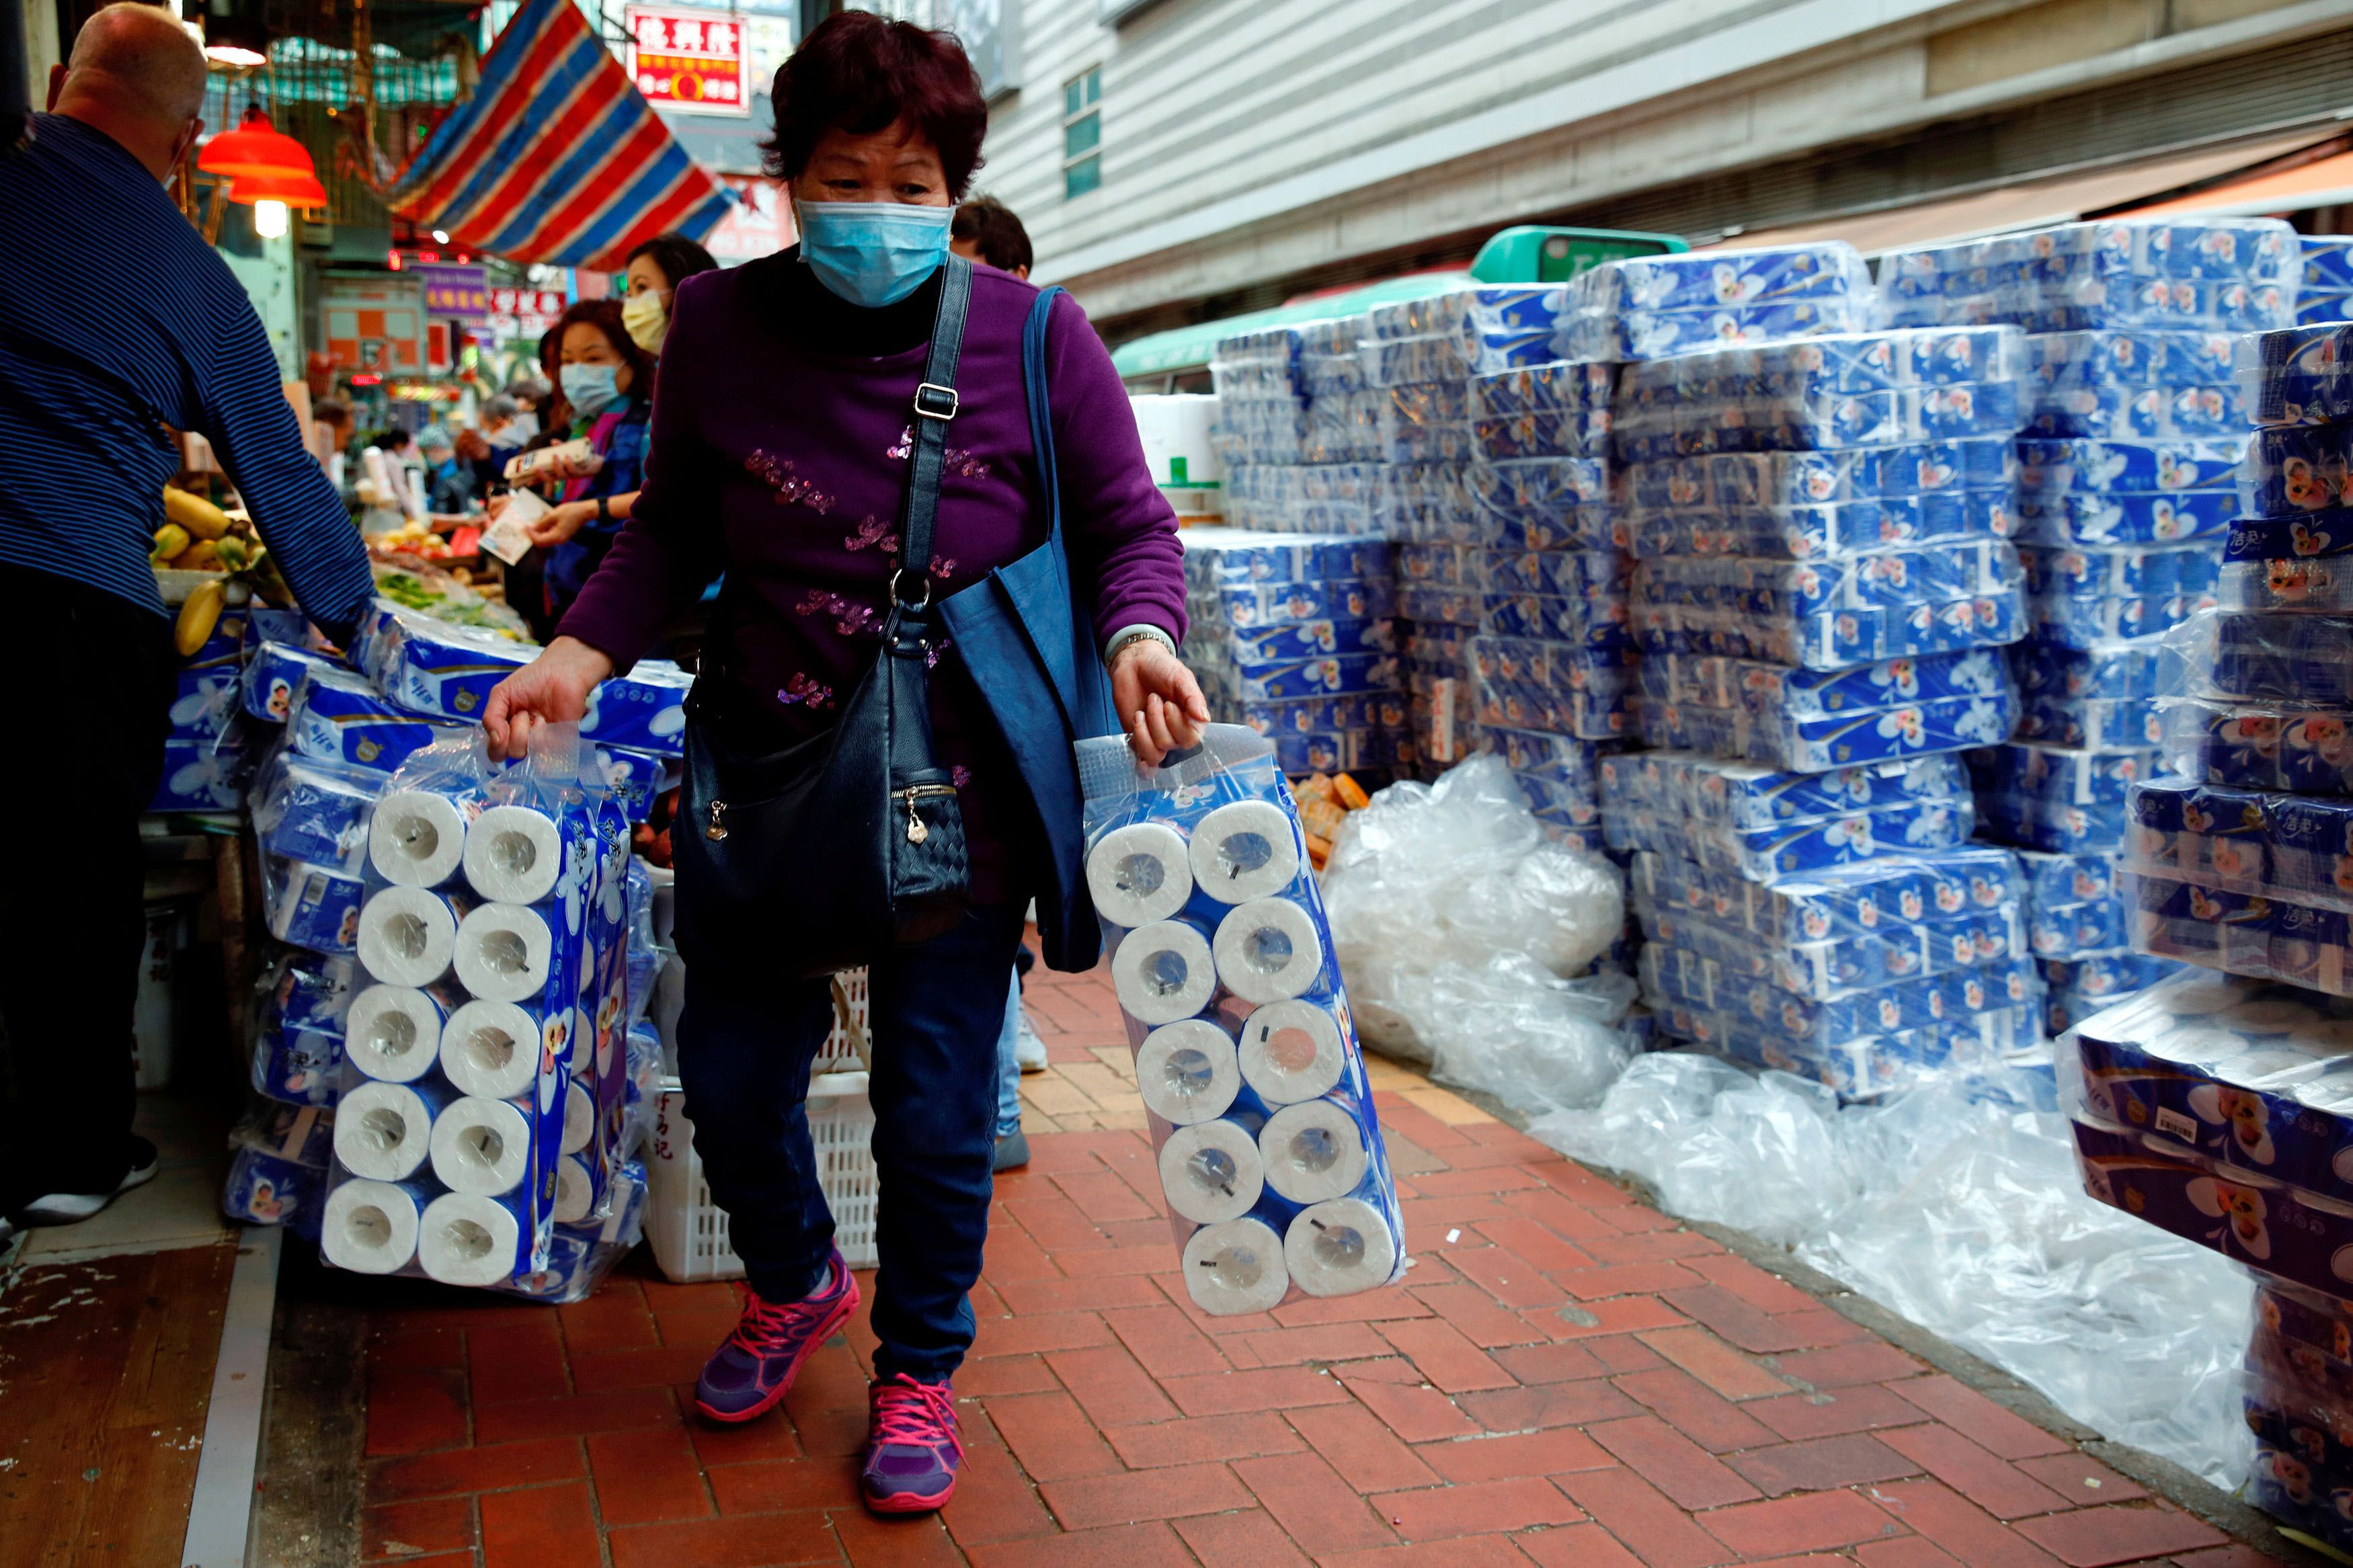 Panic-buying of toilet paper has occurred worldwide amid the coronavirus outbreak. | REUTERS